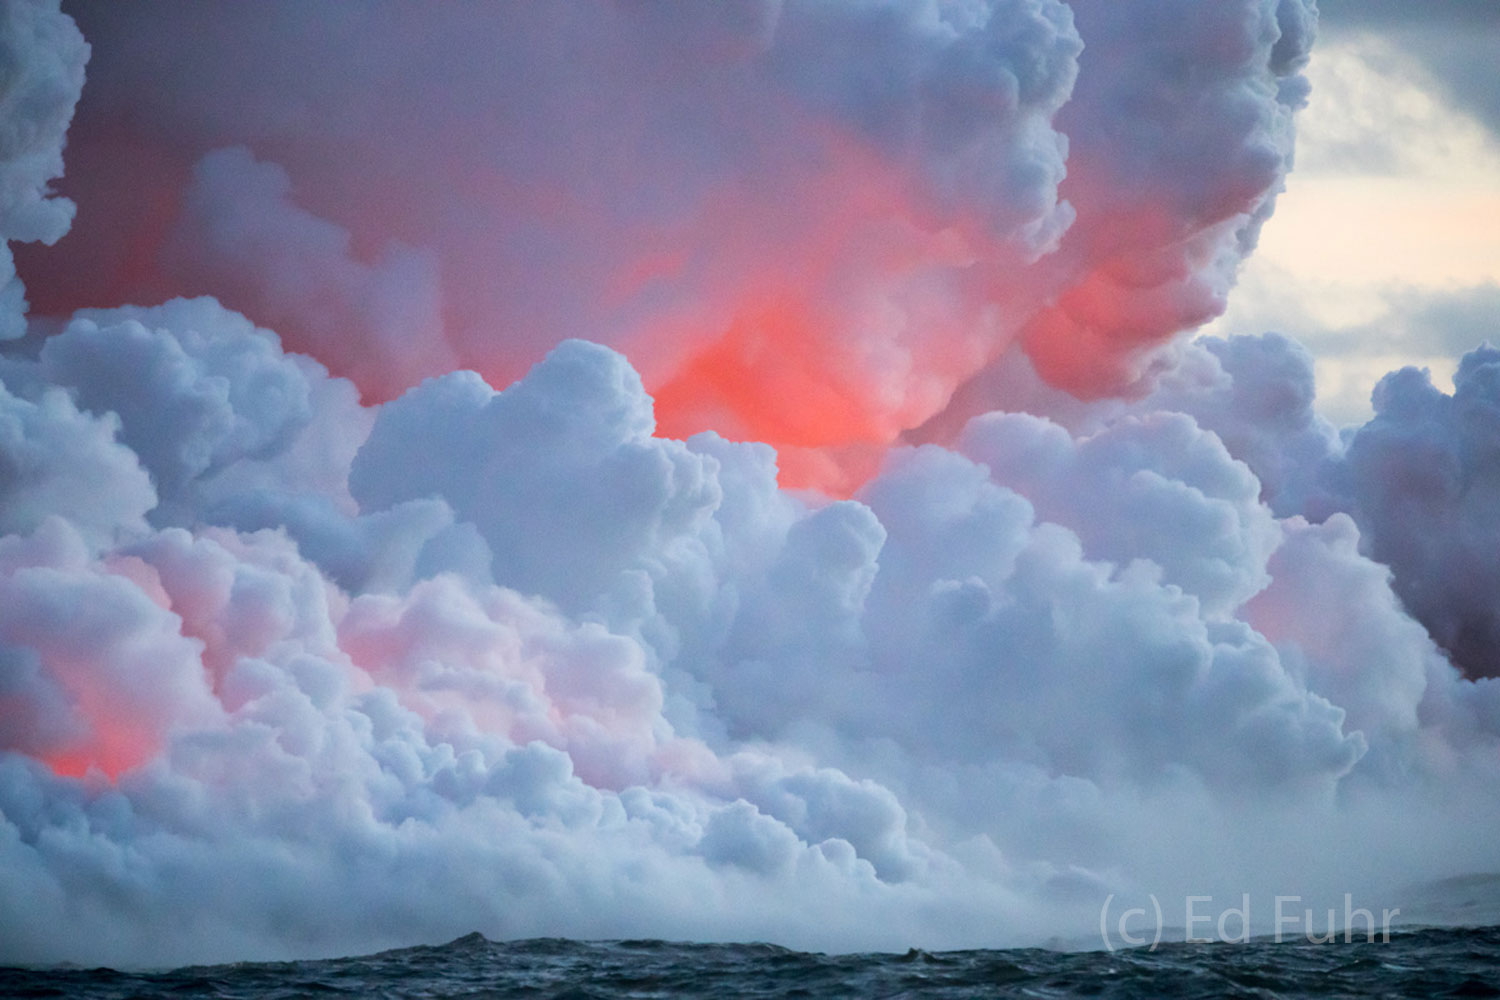 Below the soft steam cloud, the heat of the lava can be seen glowing brilliantly.